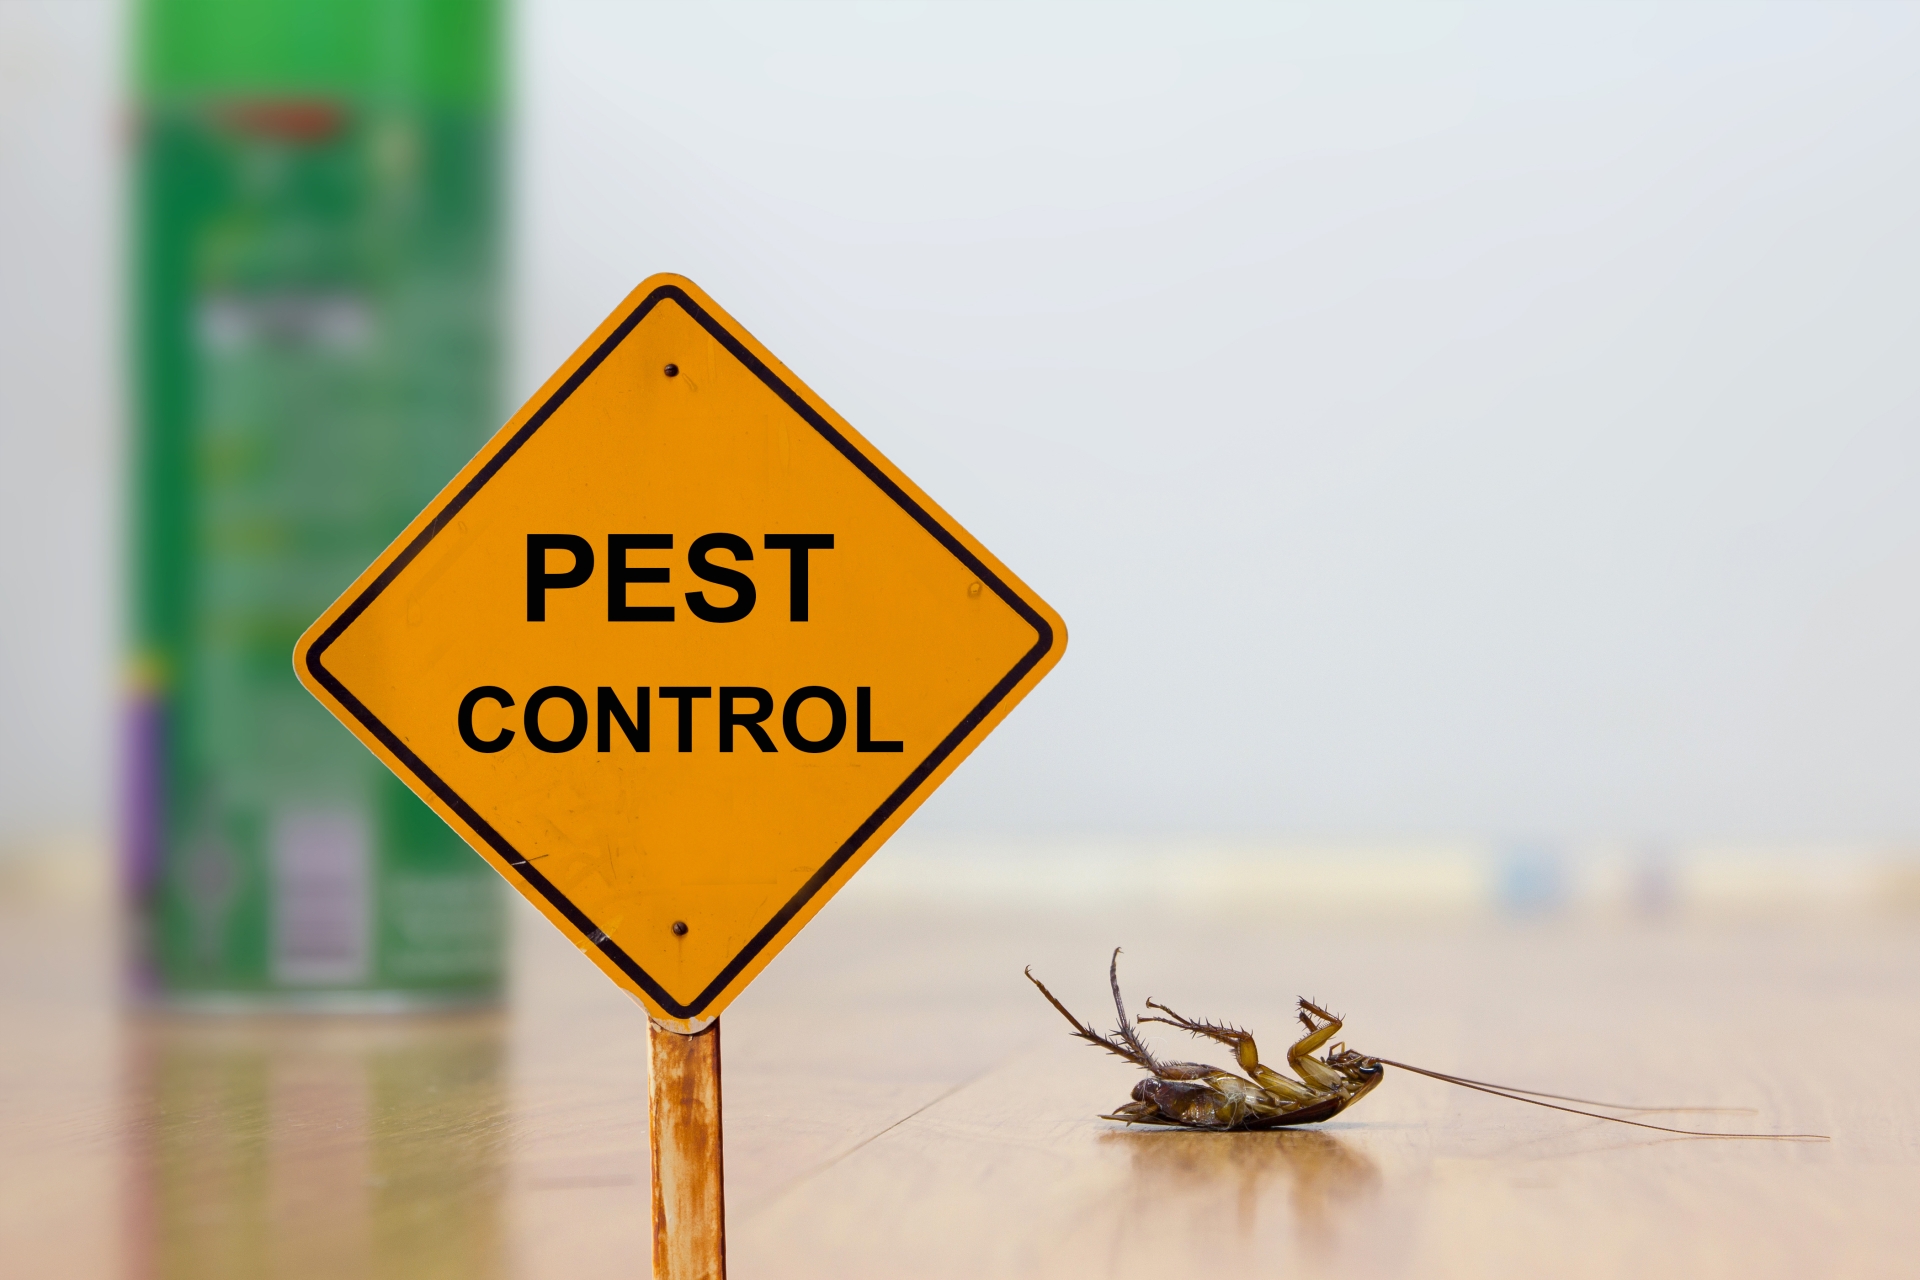 24 Hour Pest Control, Pest Control in Streatham, SW16. Call Now 020 8166 9746